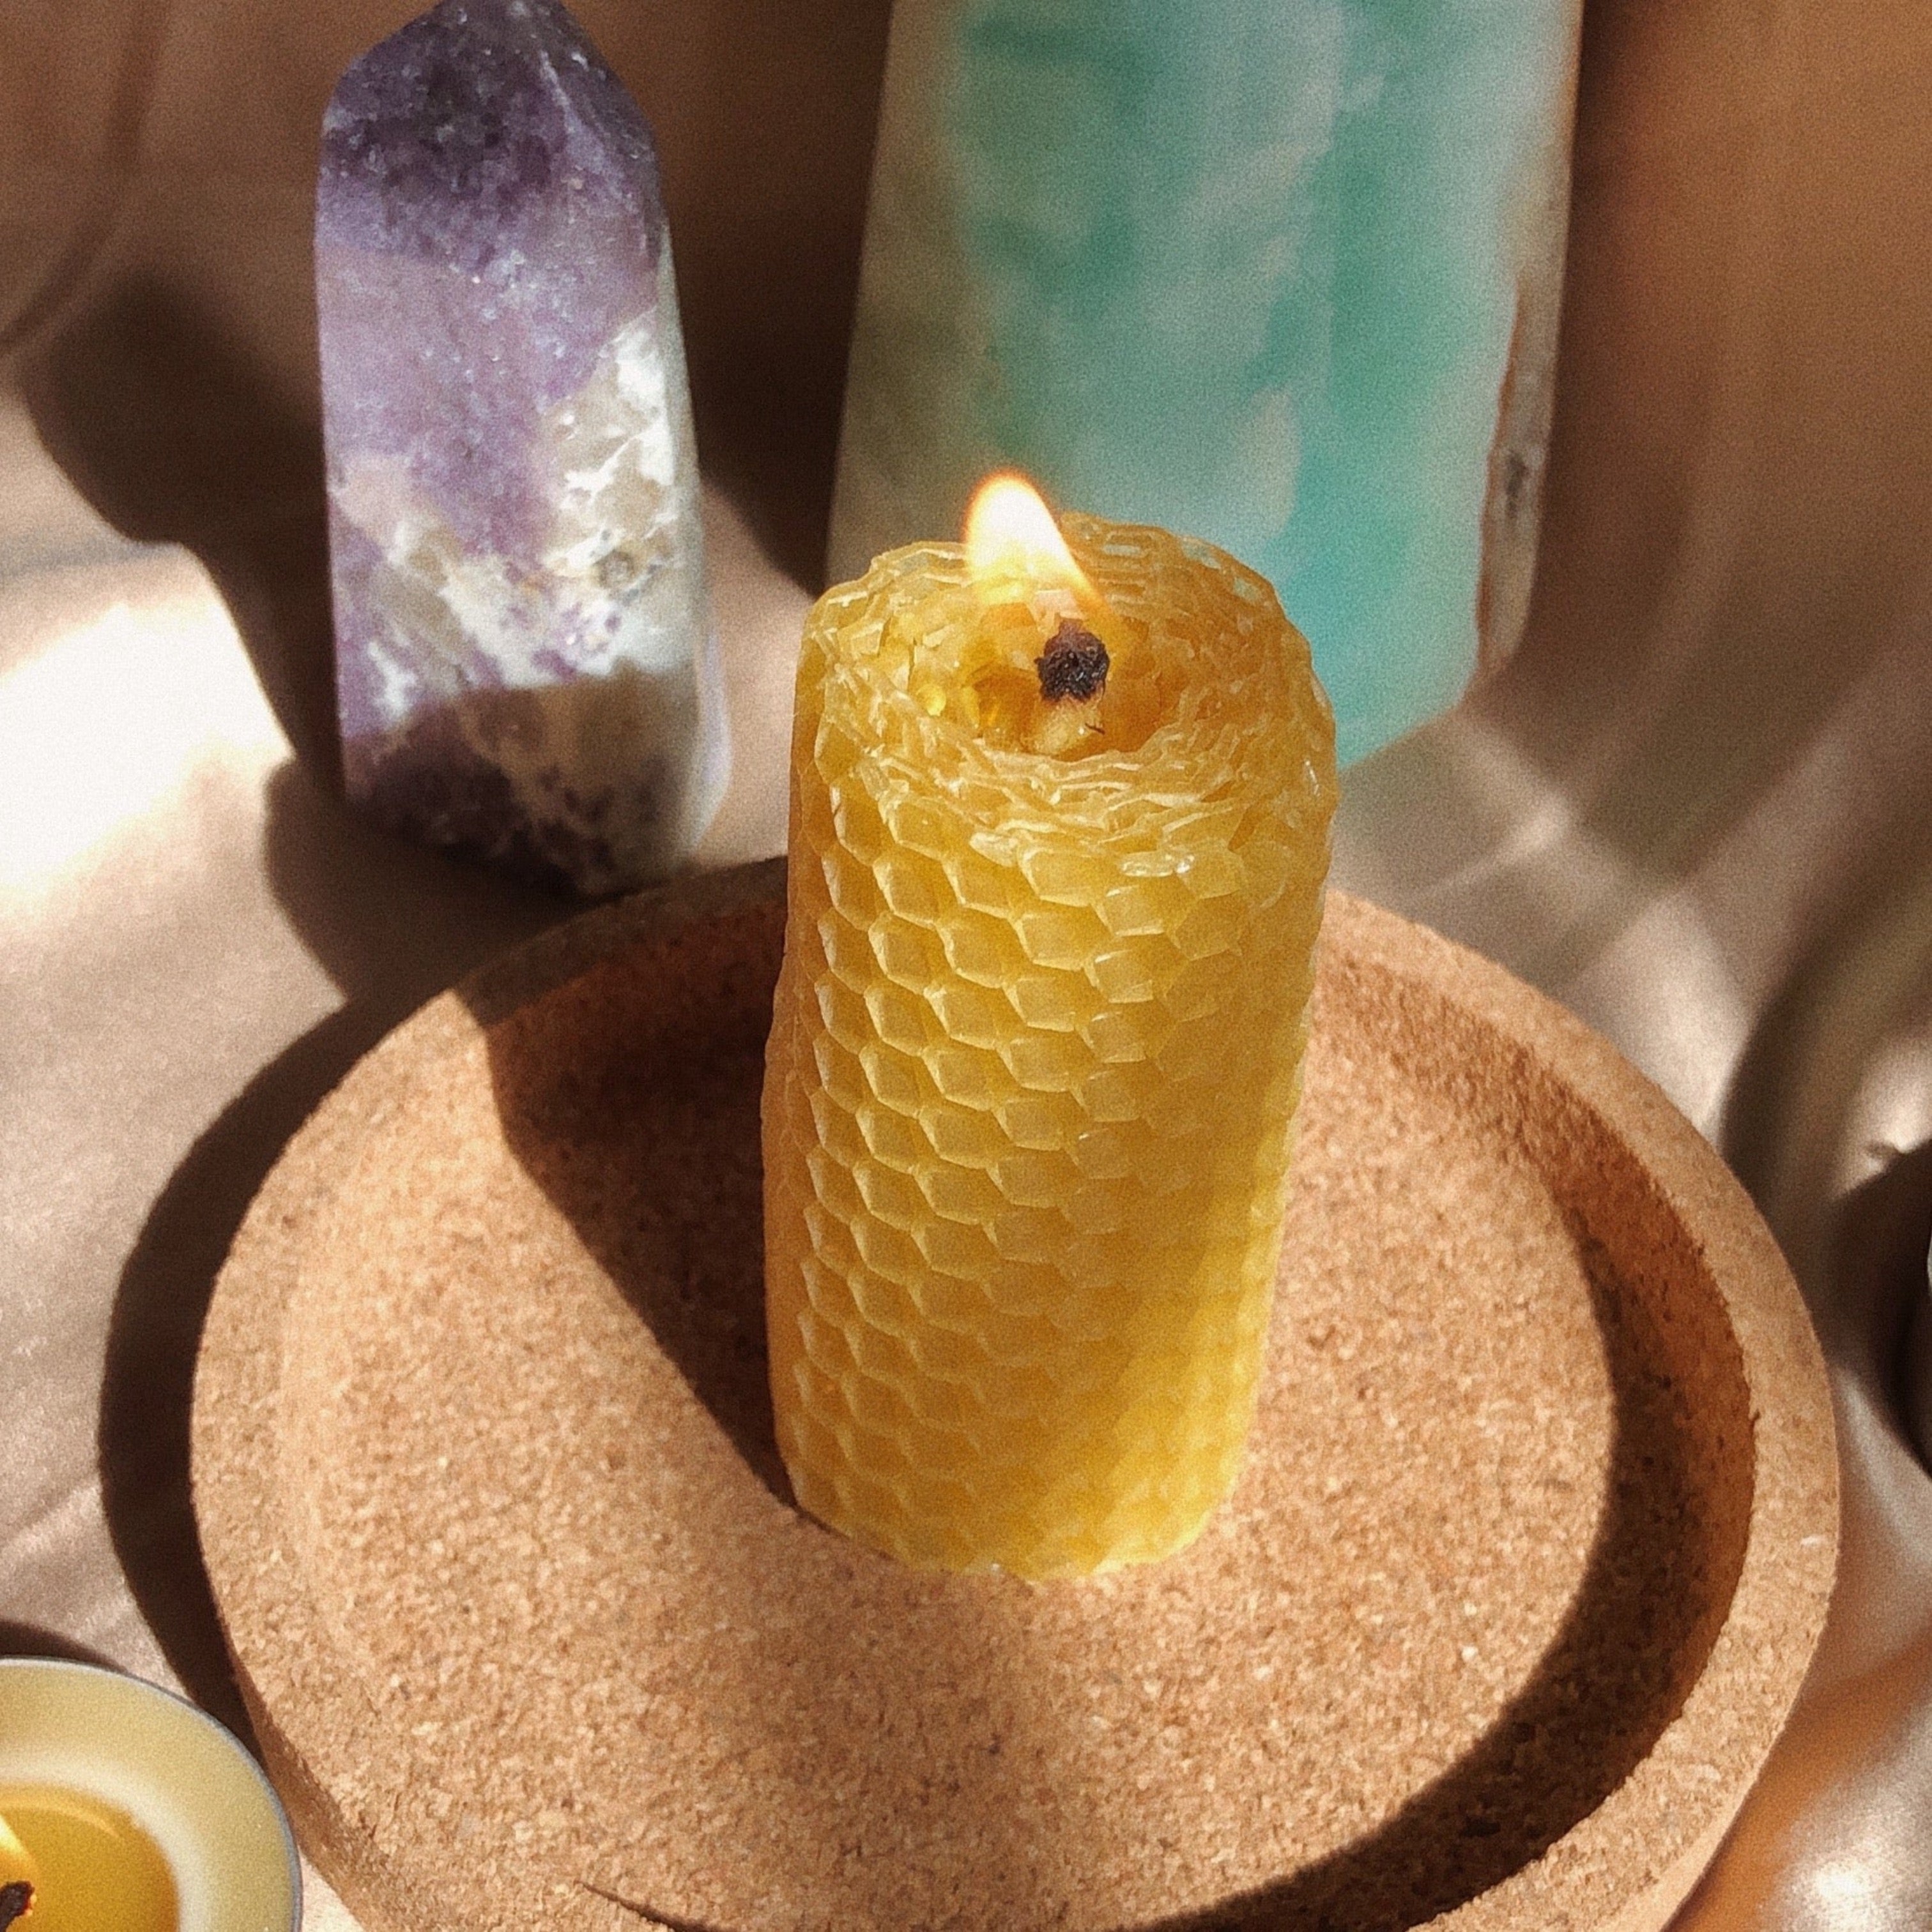 100% Beeswax Rolled Candle [6cm]